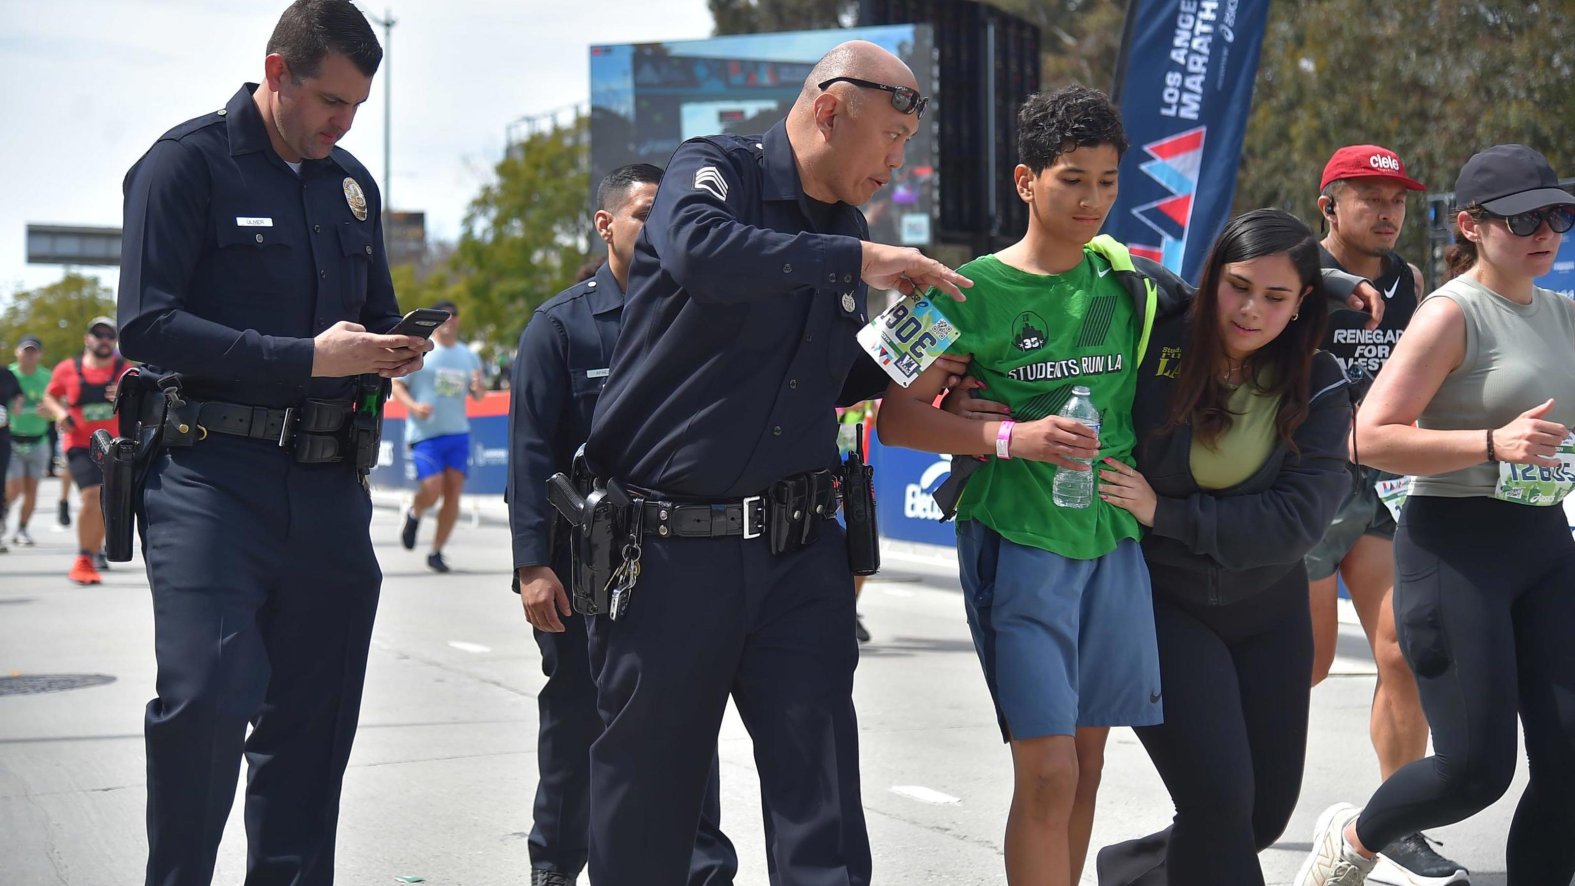 LAPD Sergeant helps carry young runner to LA Marathon finish NBC Chicago